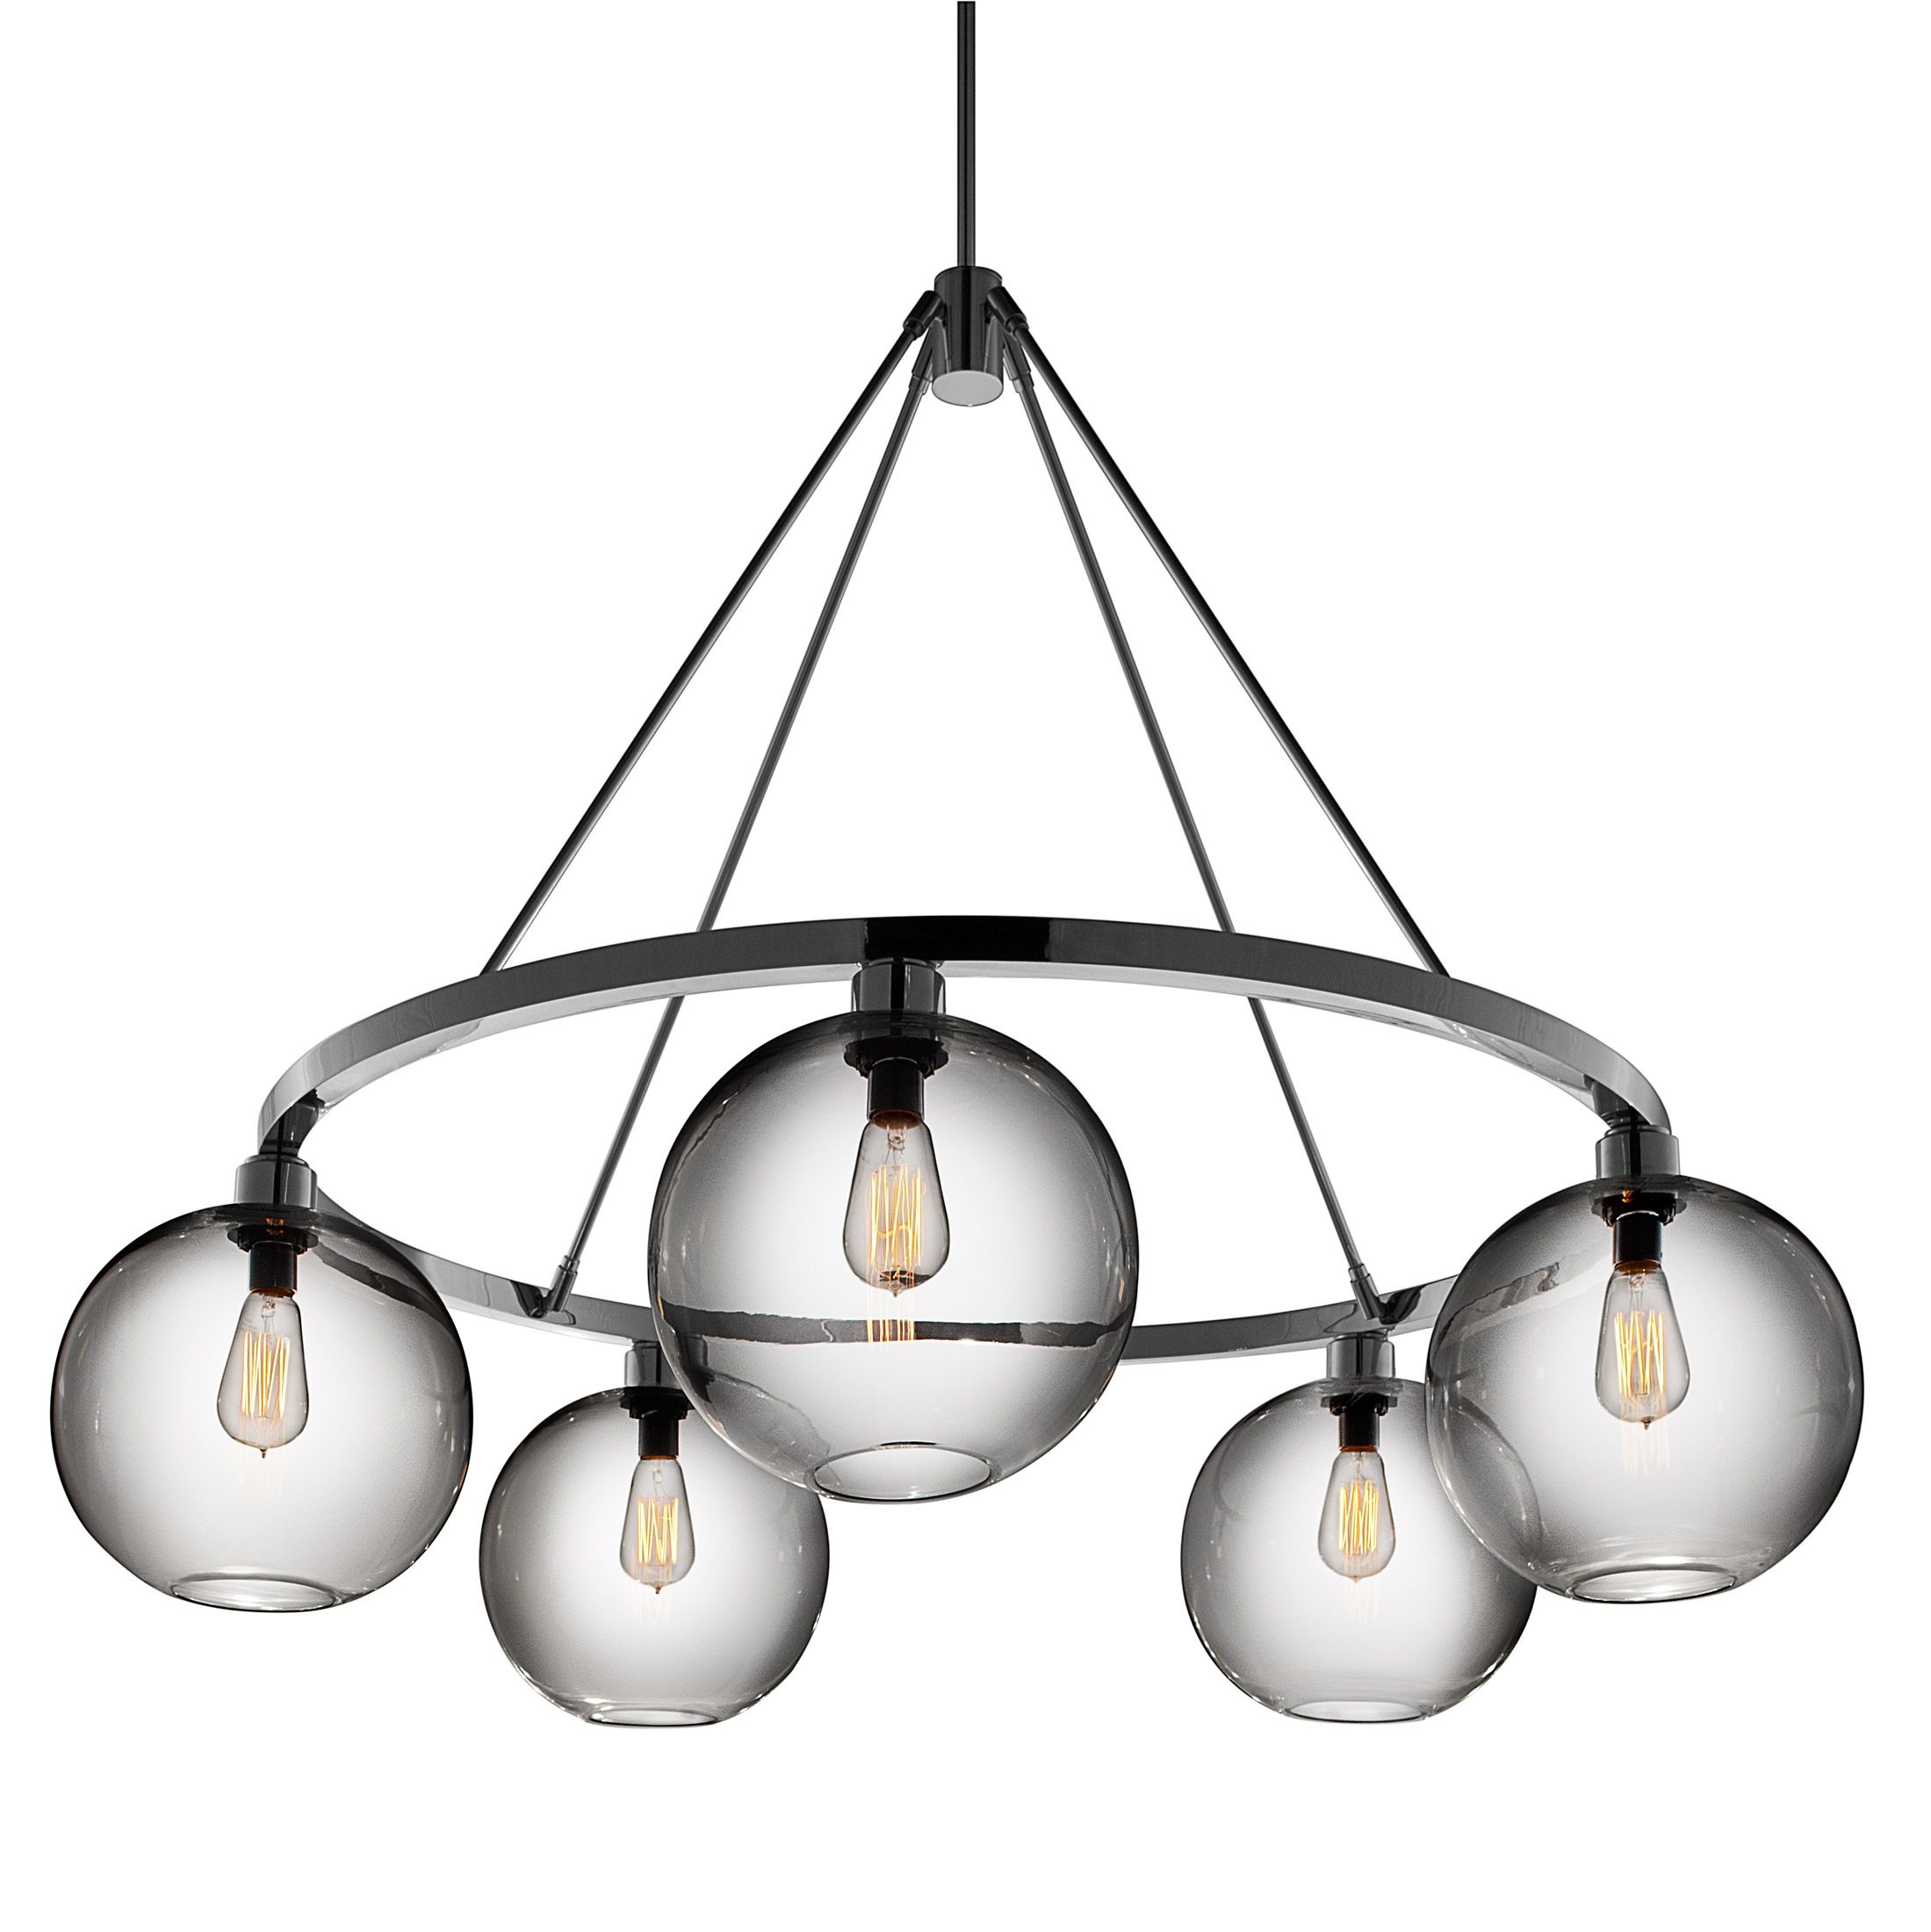 53 Modern Chandelier Lighting Modern Contemporary Crystal Pendant Intended For Contemporary Chandelier (View 6 of 12)